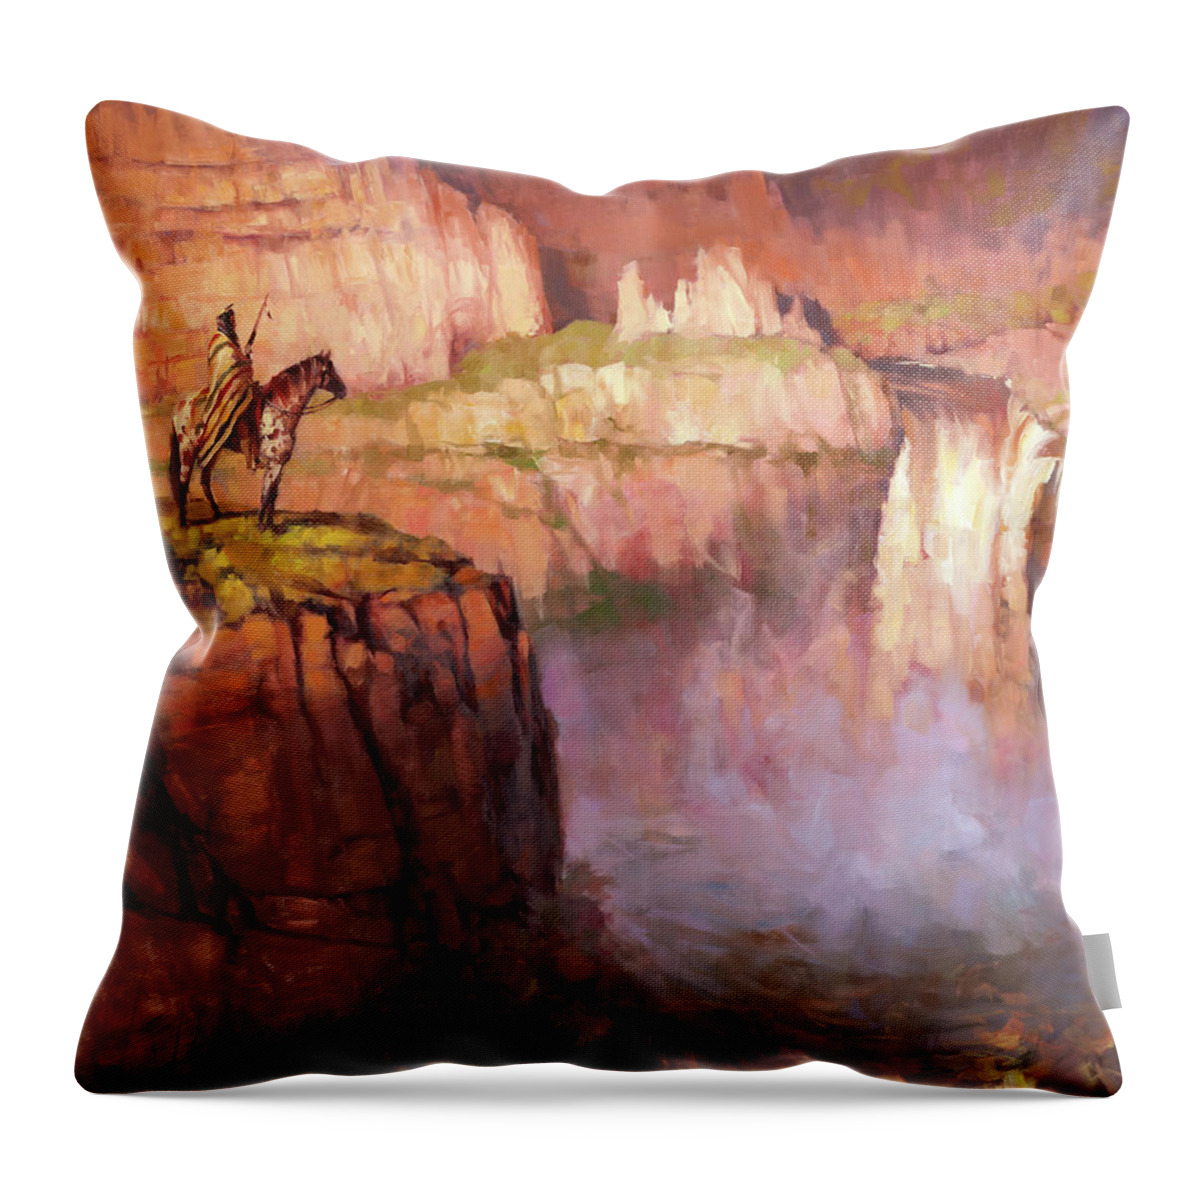 Landscape Throw Pillow featuring the painting Deep Thoughts by Steve Henderson